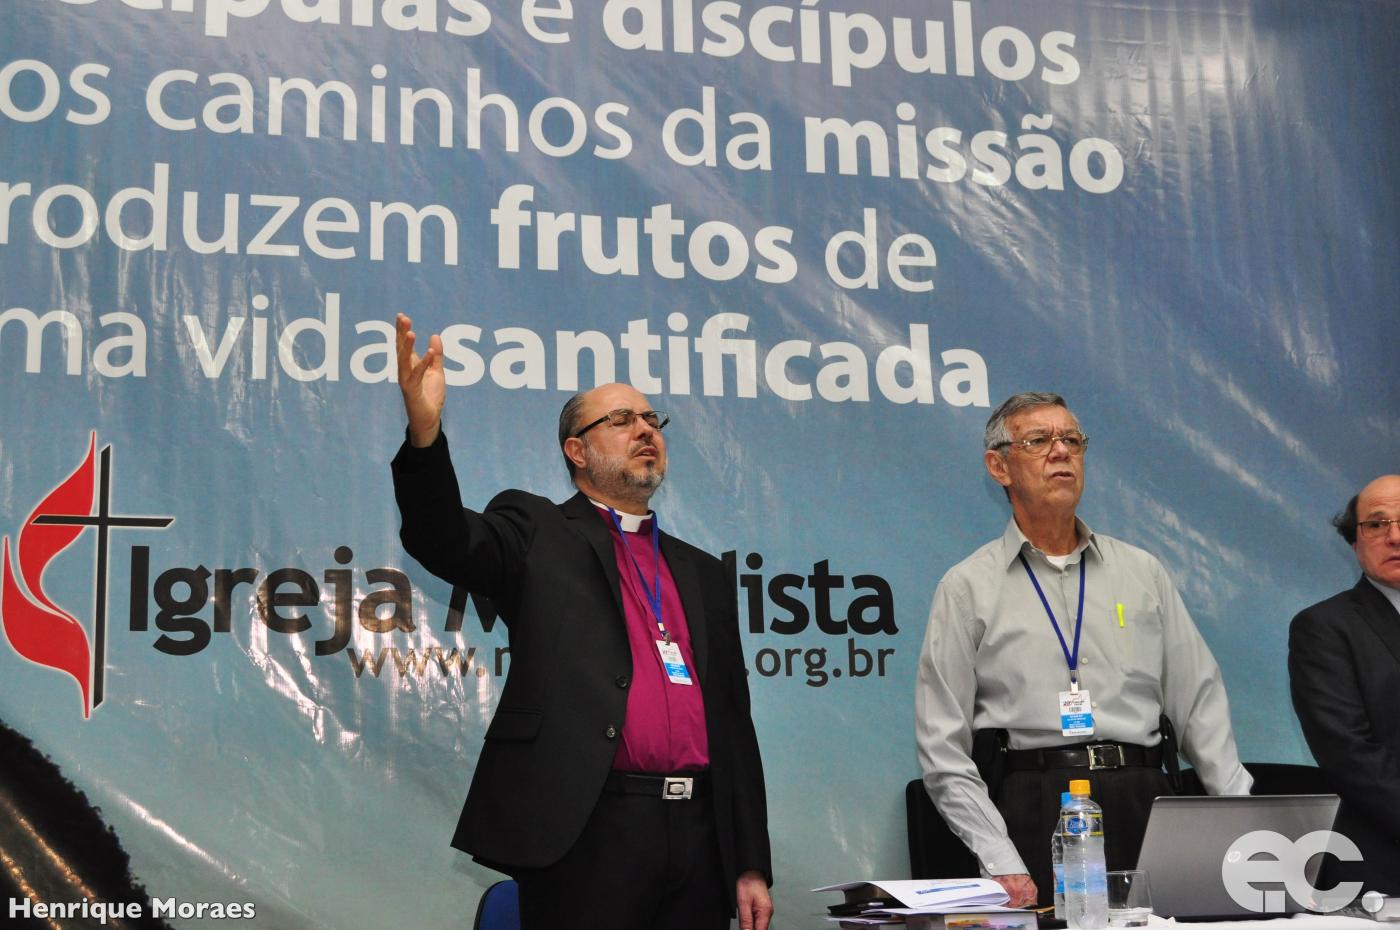 Bishop Adonias Pereira do Lago (l), president of the College of Bishops, and Bishop Stanley da Silva Moraes (r), secretary of the College of Bishops, during the 20th General Council. © Henrique Moraes/EC  